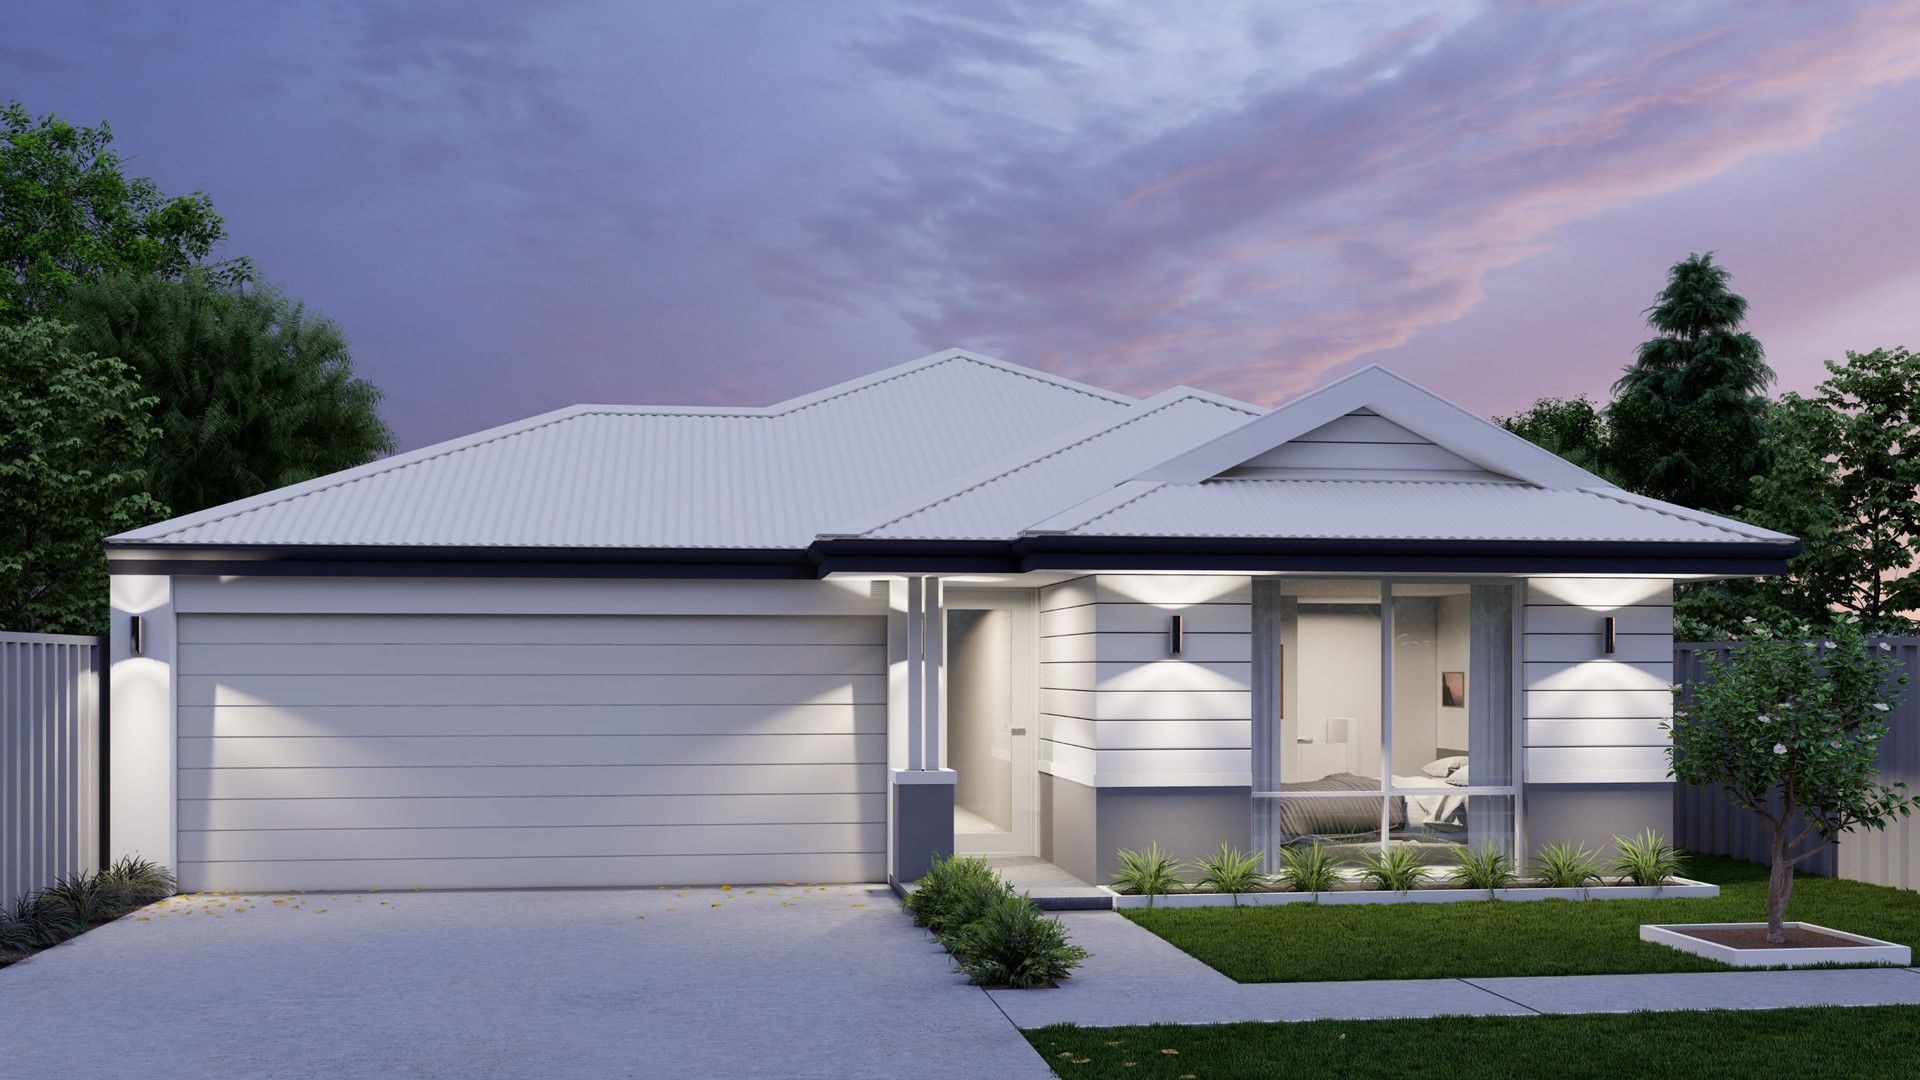 3 bedrooms New House & Land in 10 Clementine Estate UPPER SWAN WA, 6069